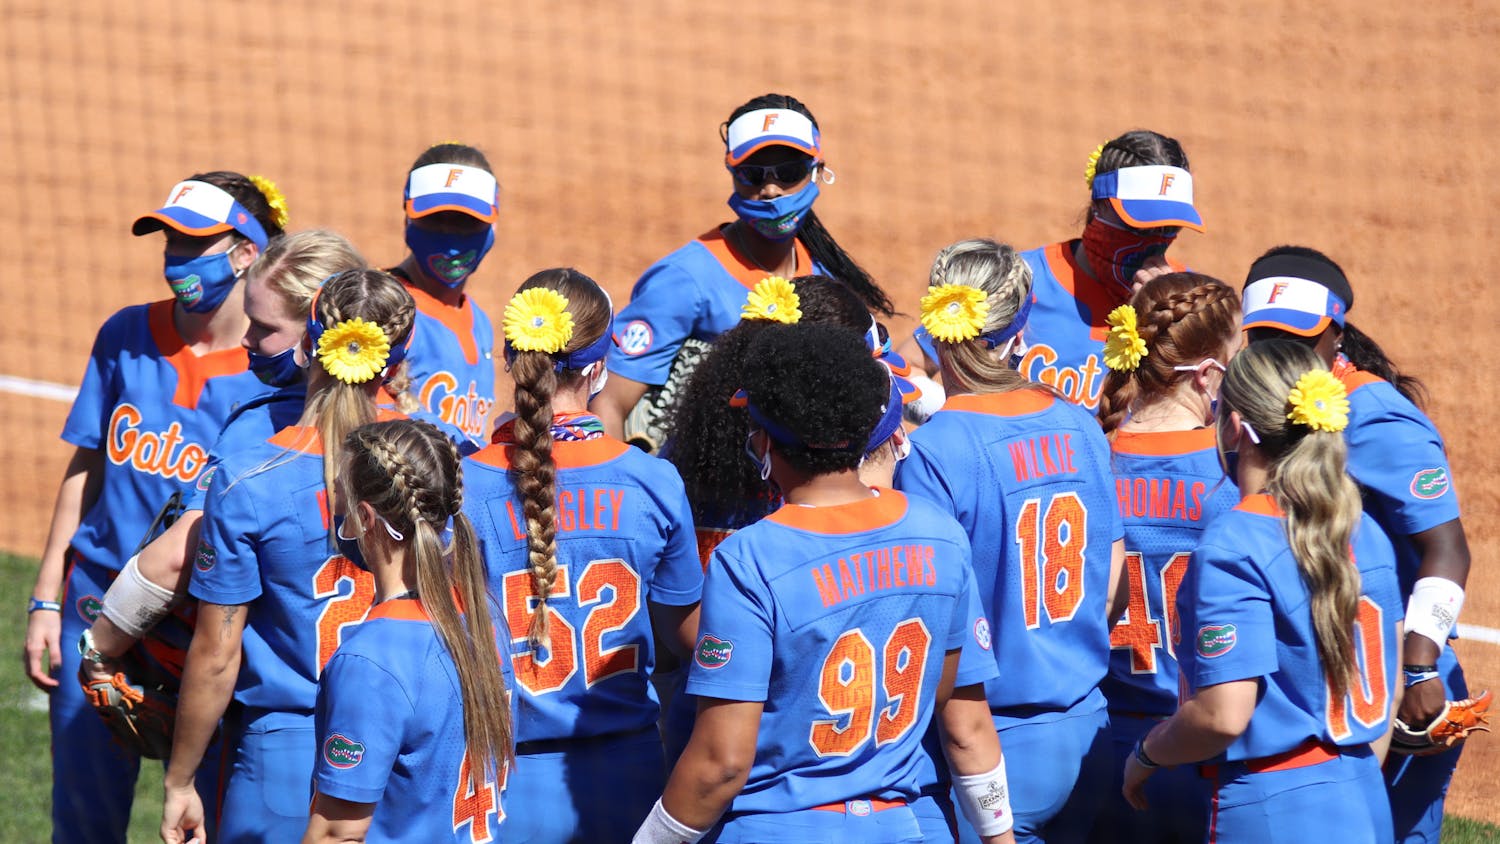 The Florida softball team huddles on February 27 in a game against Louisville. The Gators' season ended Saturday with a second straight Super Regional loss to Georgia.